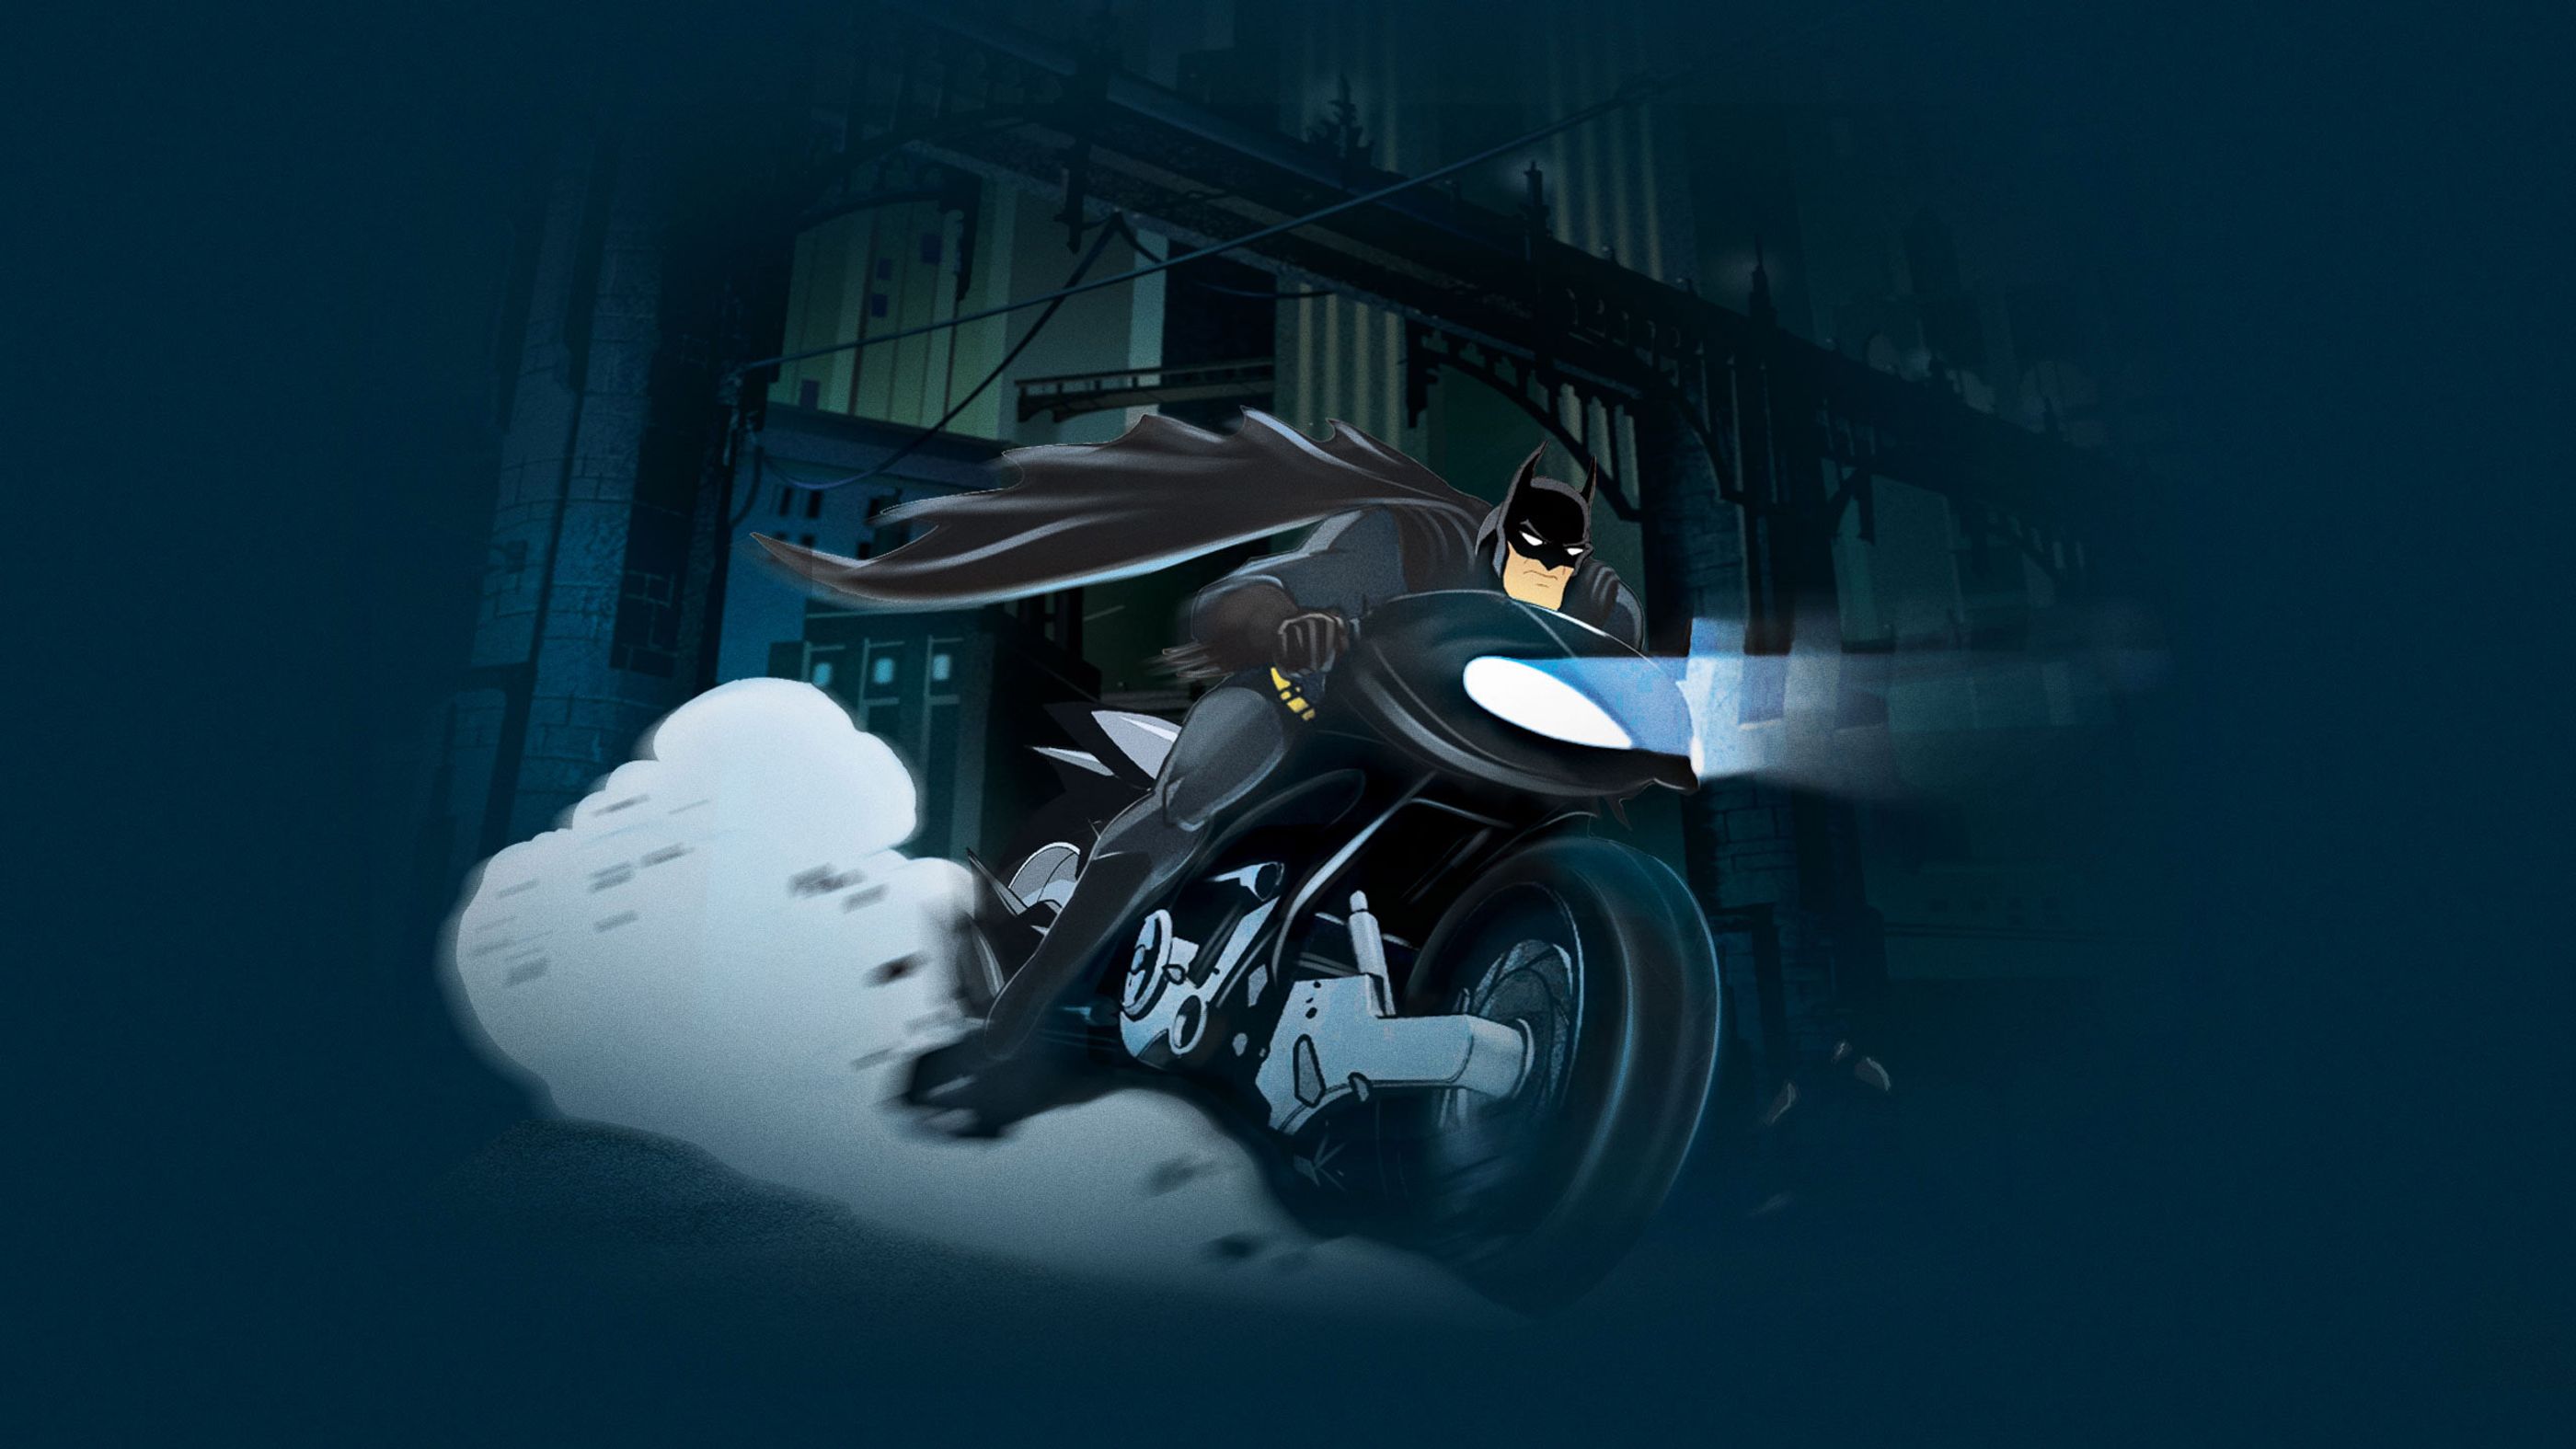 ekstremister Army Grudge Batman: Under the Red Hood | Movies Anywhere